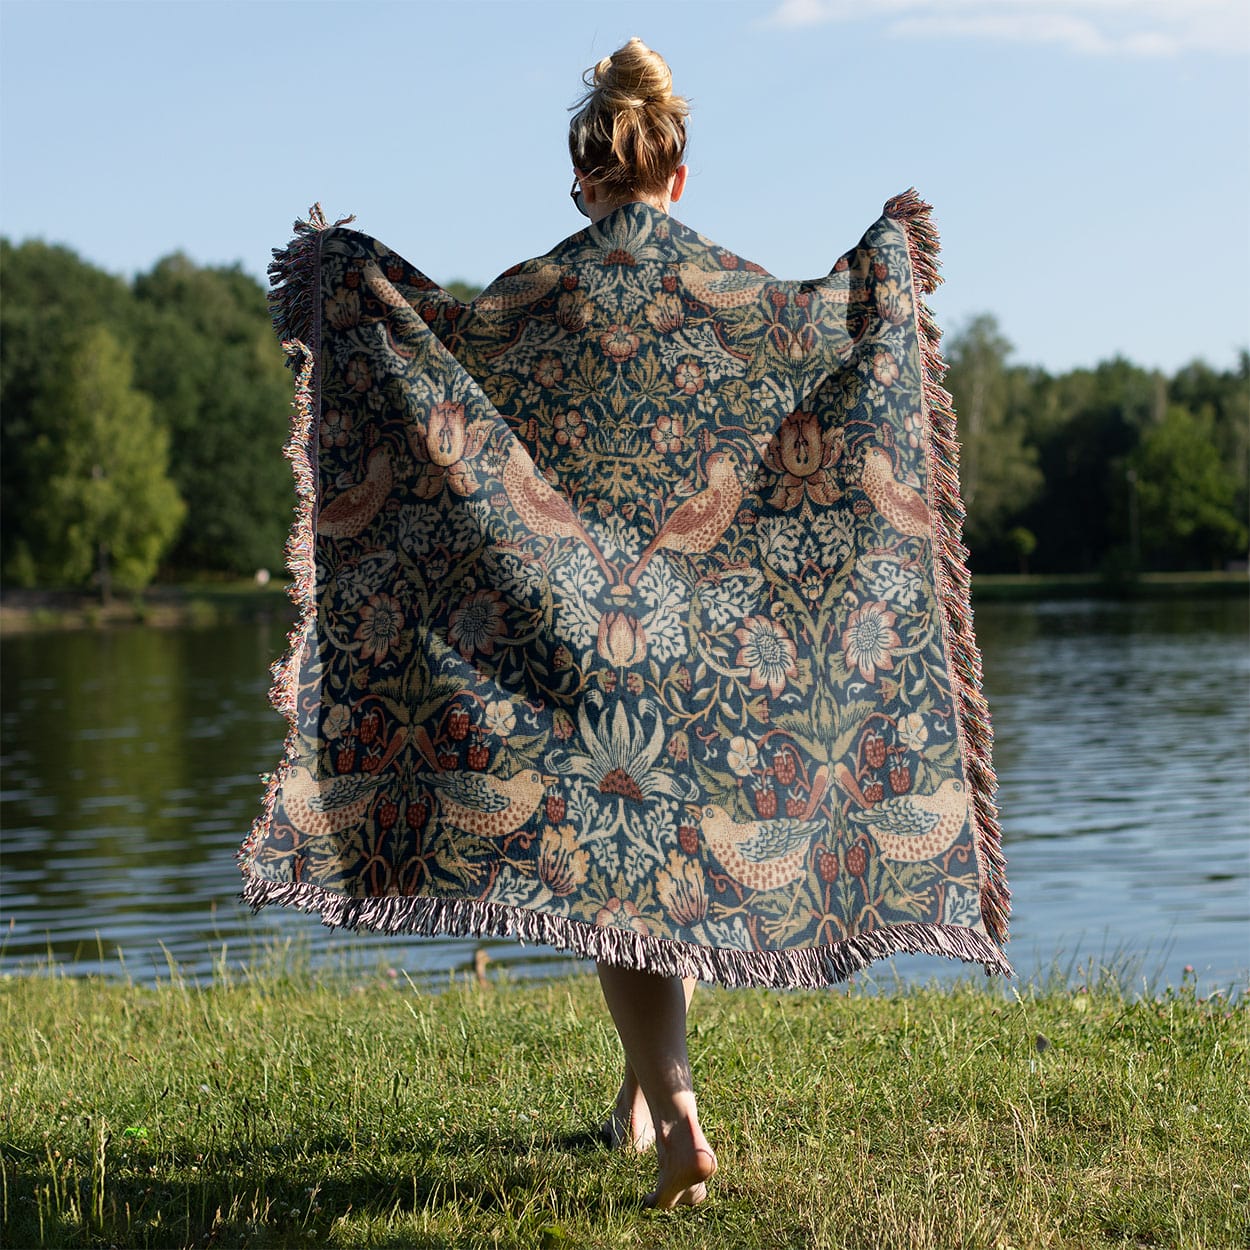 Birds and Plants Woven Blanket Held on a Woman's Back Outside